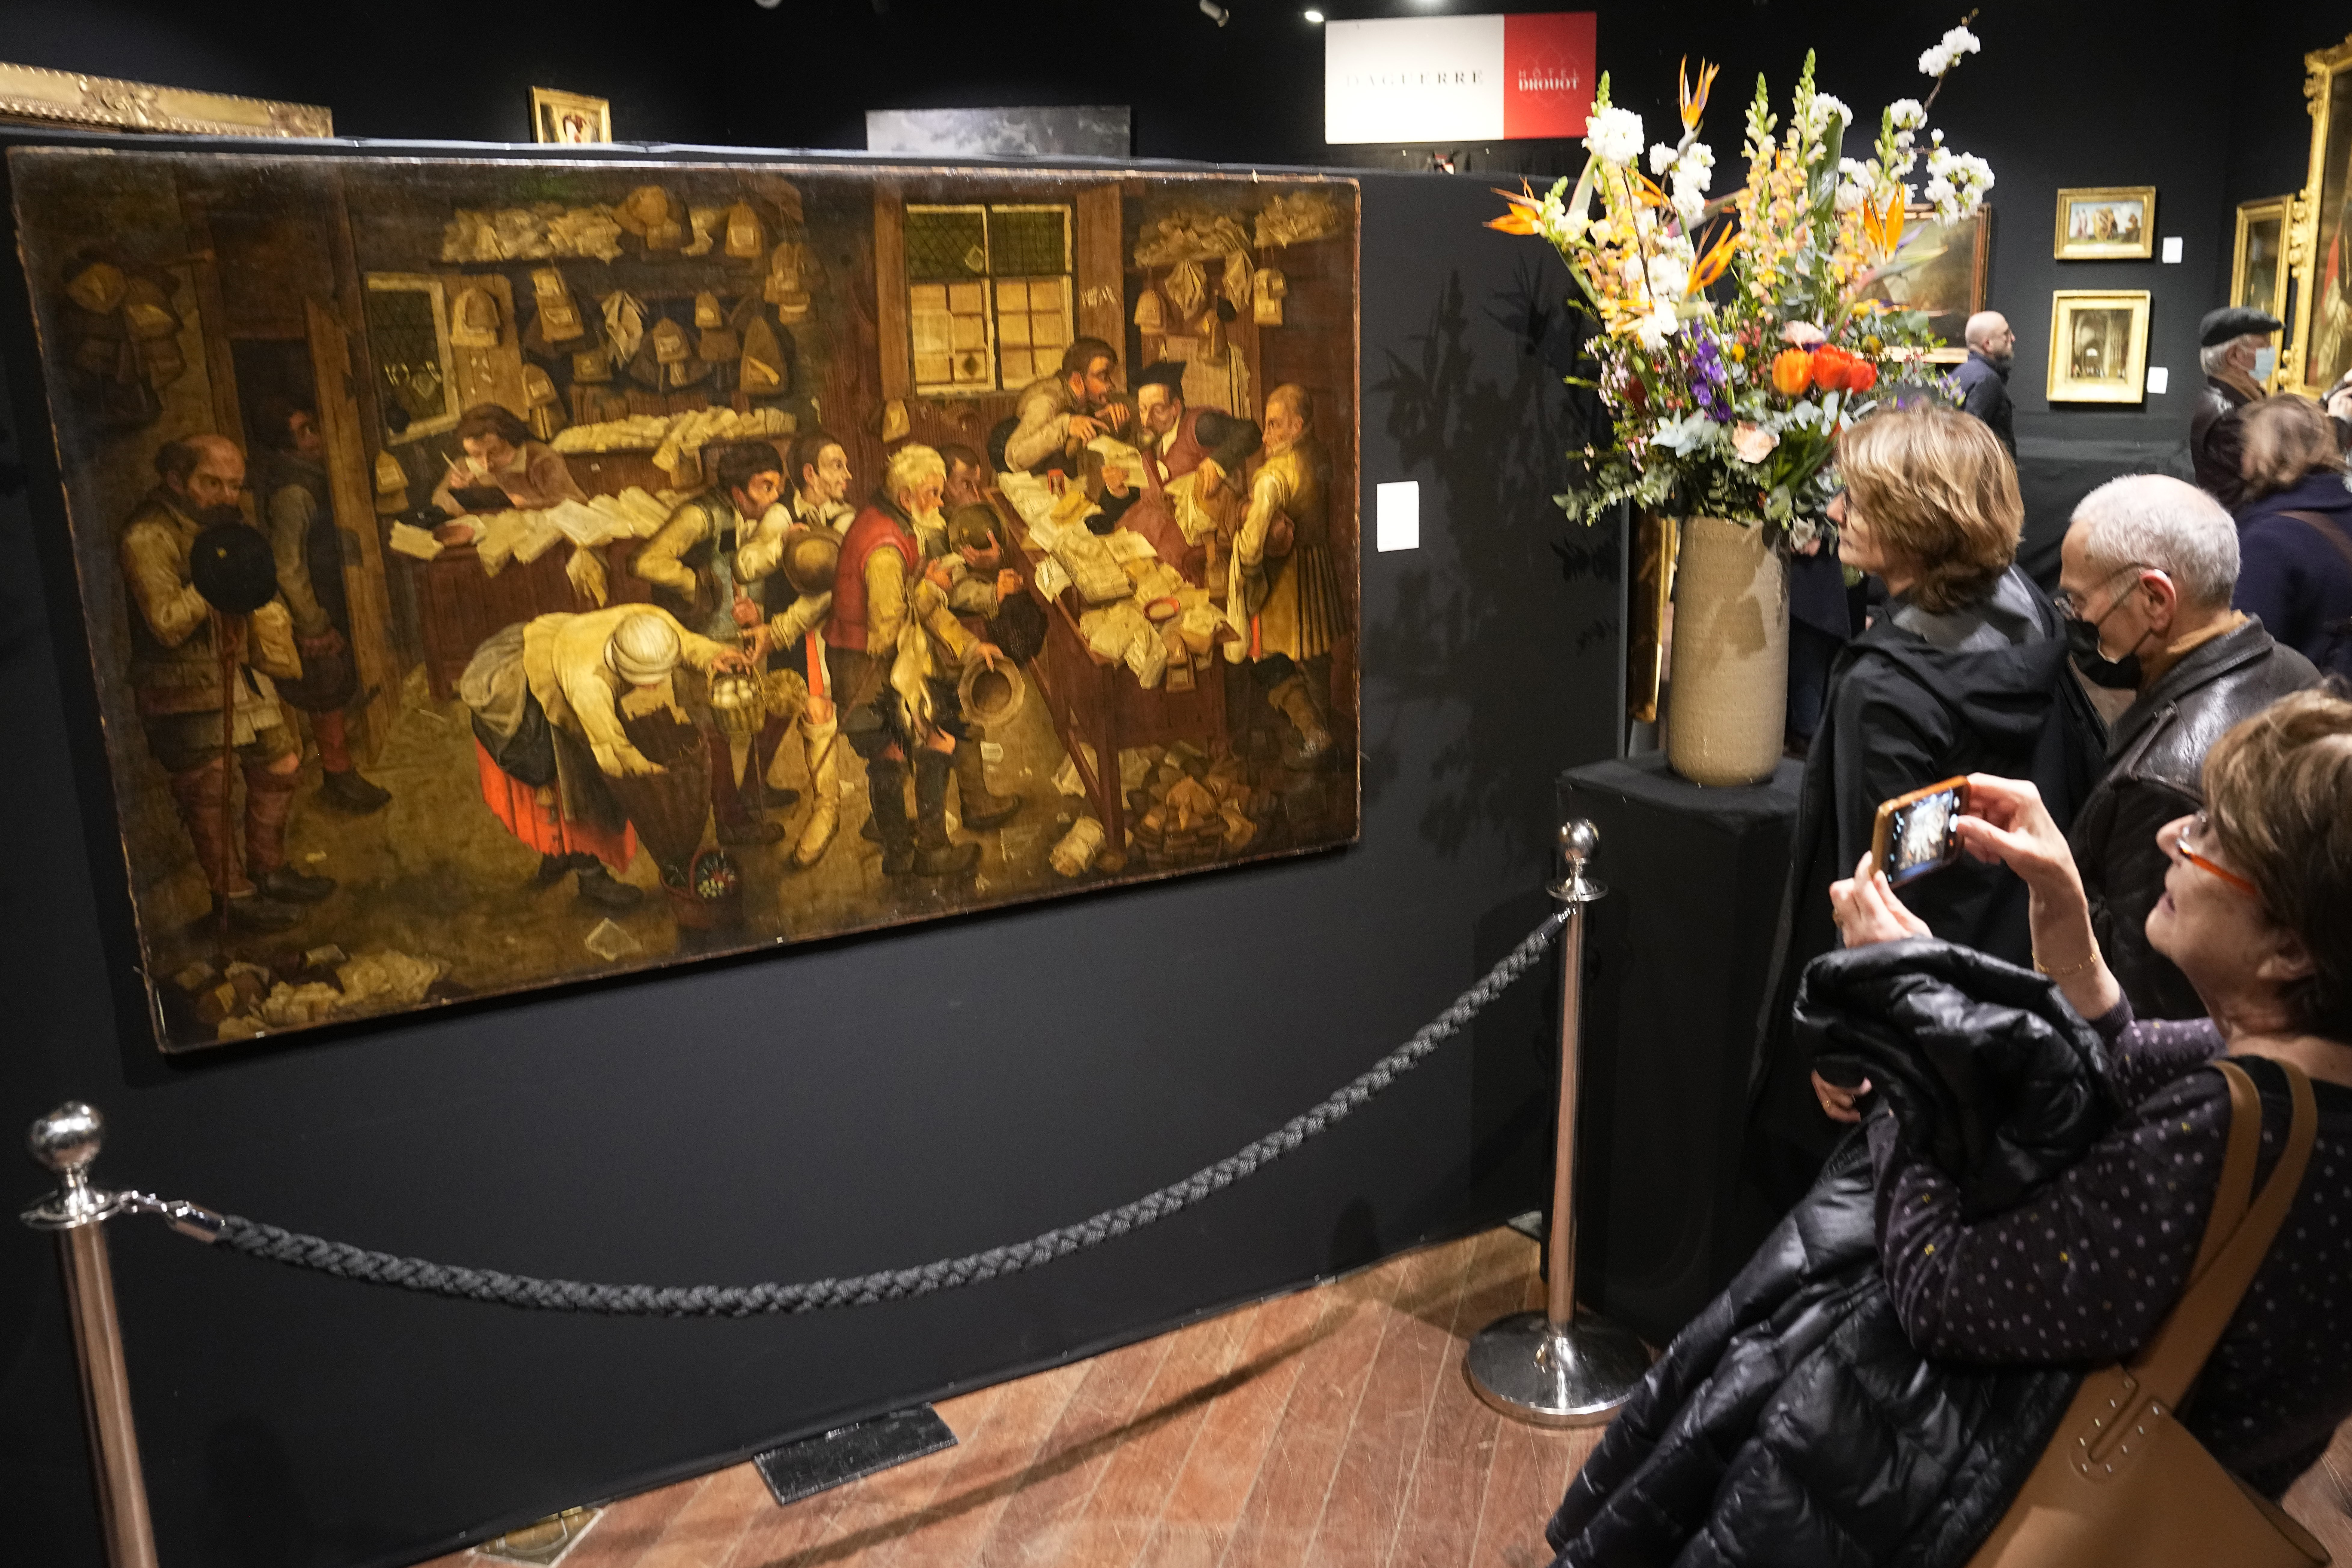 Visitors were able to see the painting by Pieter Brueghel the Younger at the Drouot auction house in Paris (AP/Michel Euler)